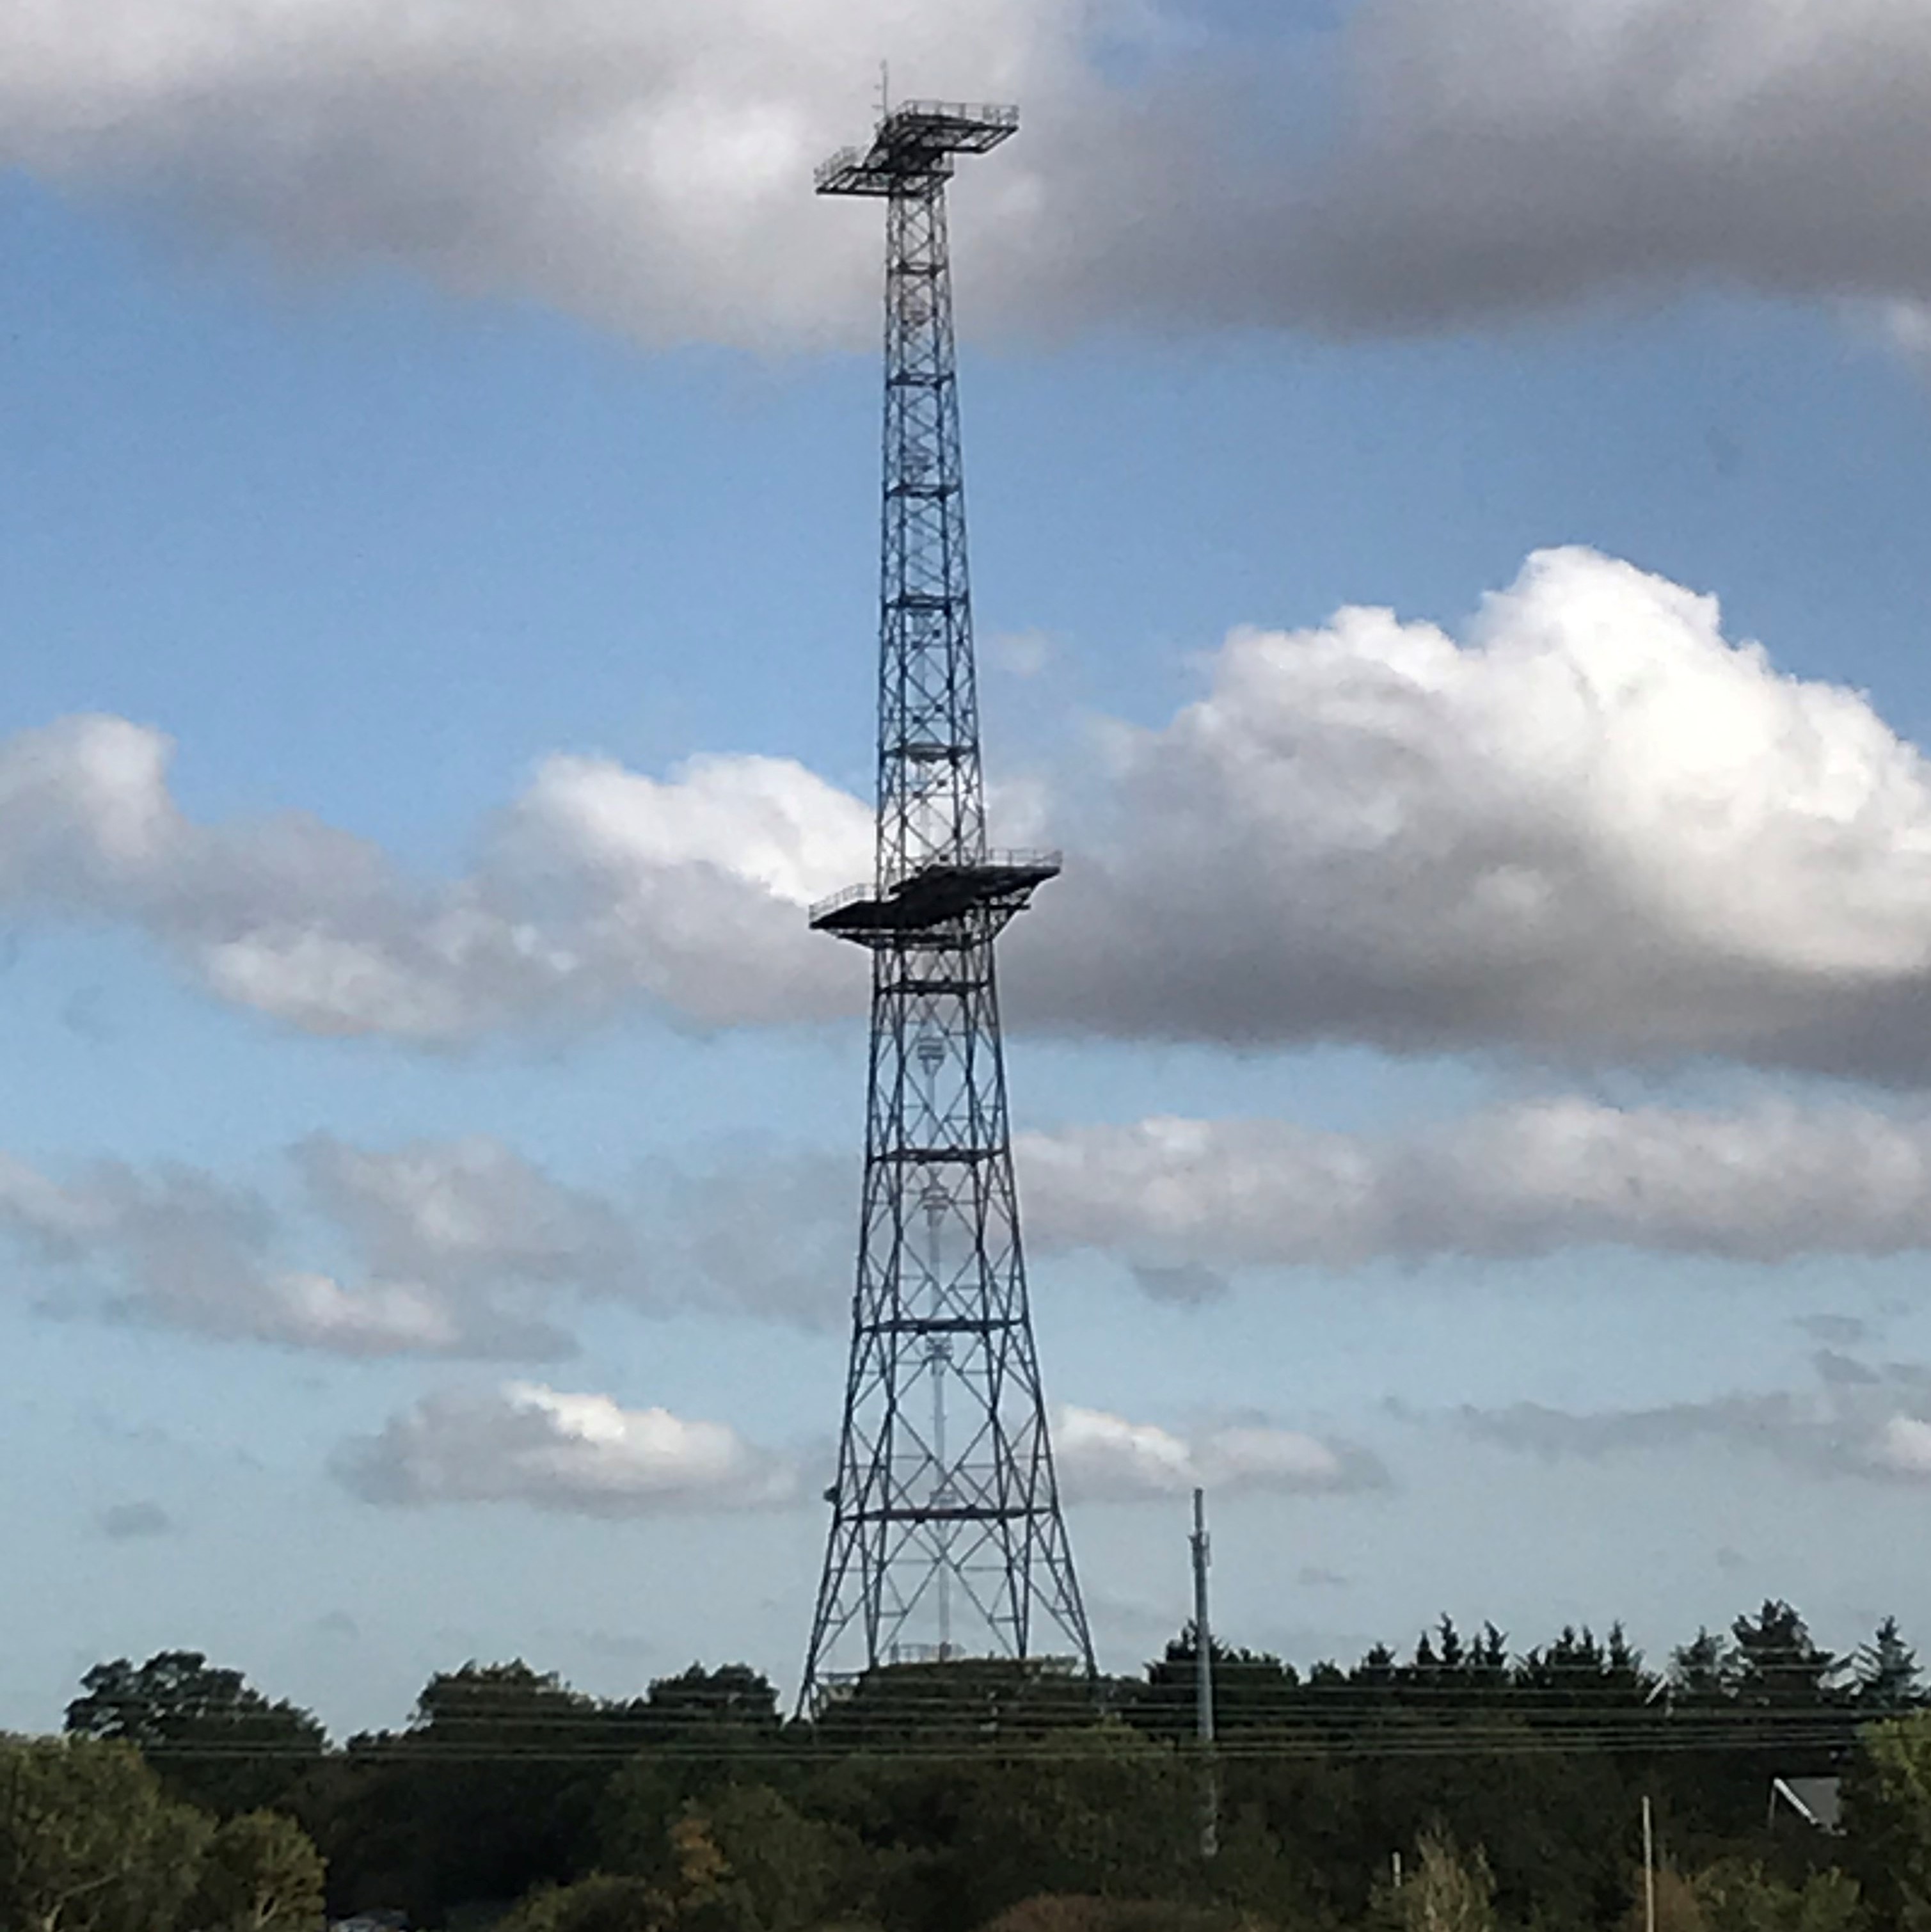 The Chain Home radar tower in Essex